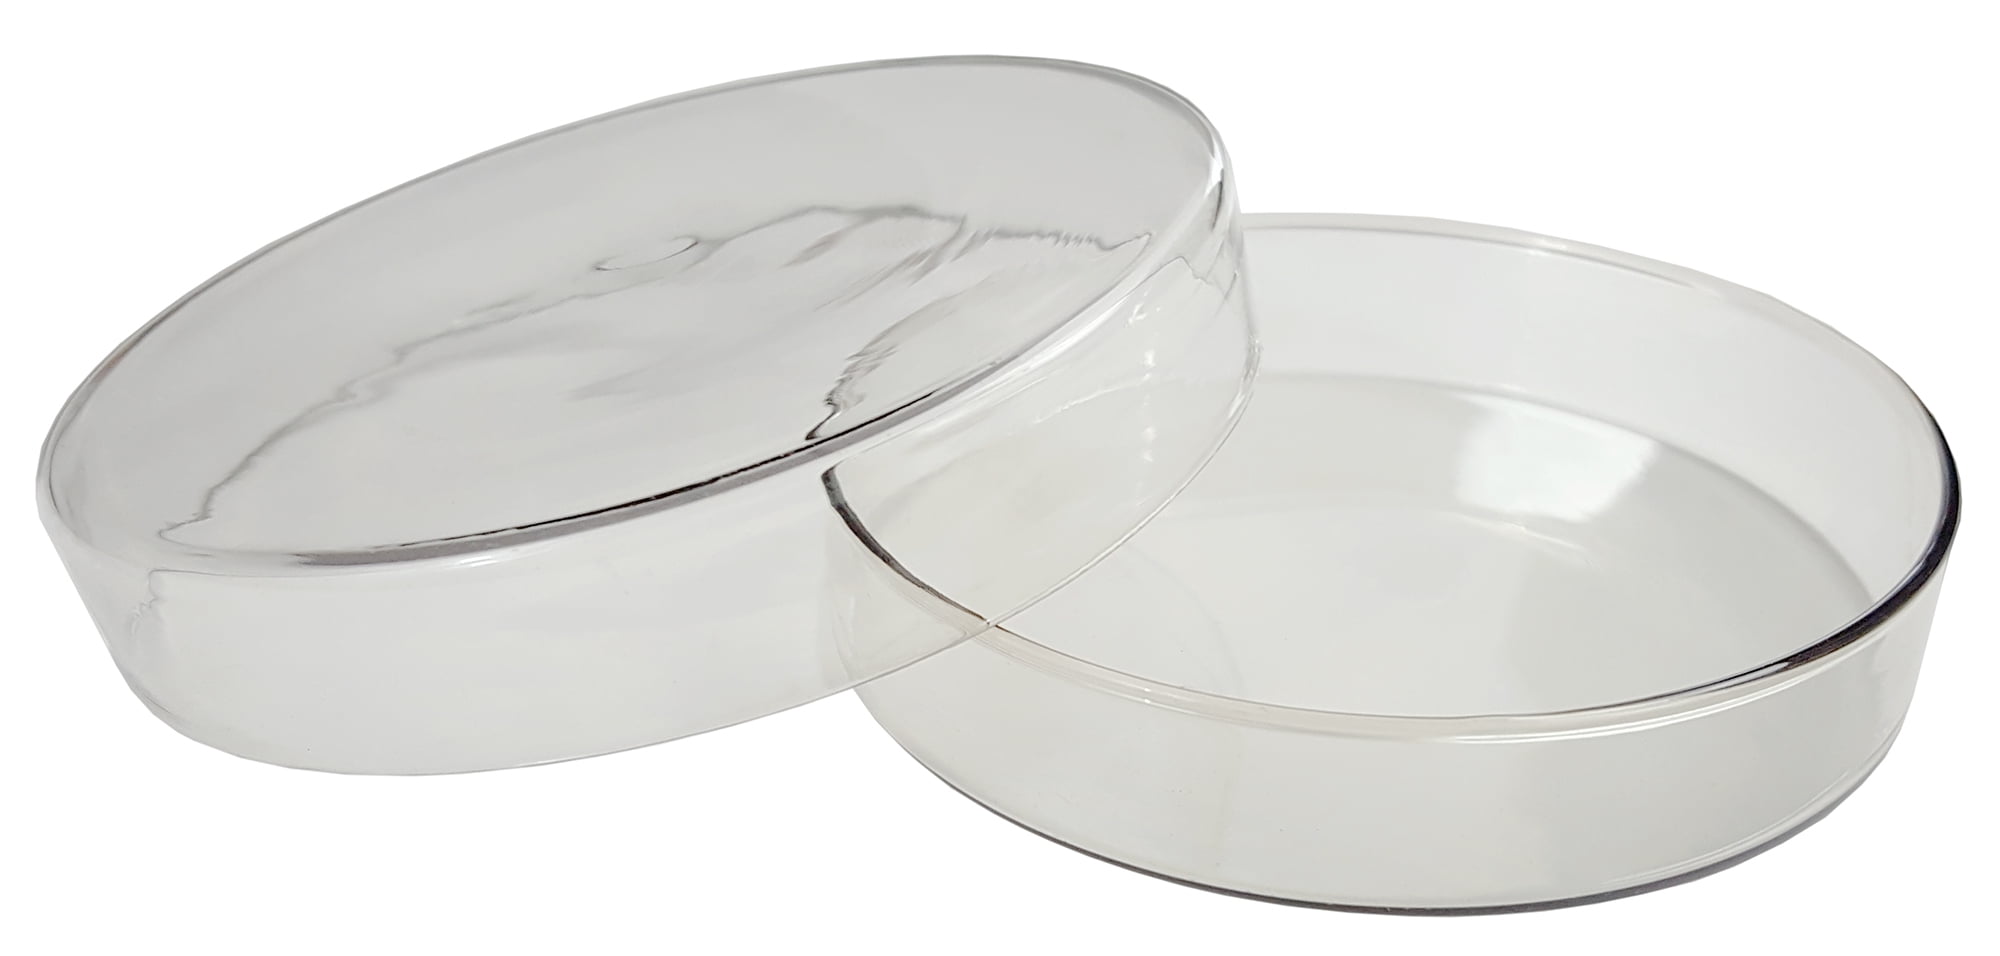 35mm x 10mm Sterile Plastic Petri Dishes with Lid for LB Plate Yeast Transparent color LilyJudy 10 pcs